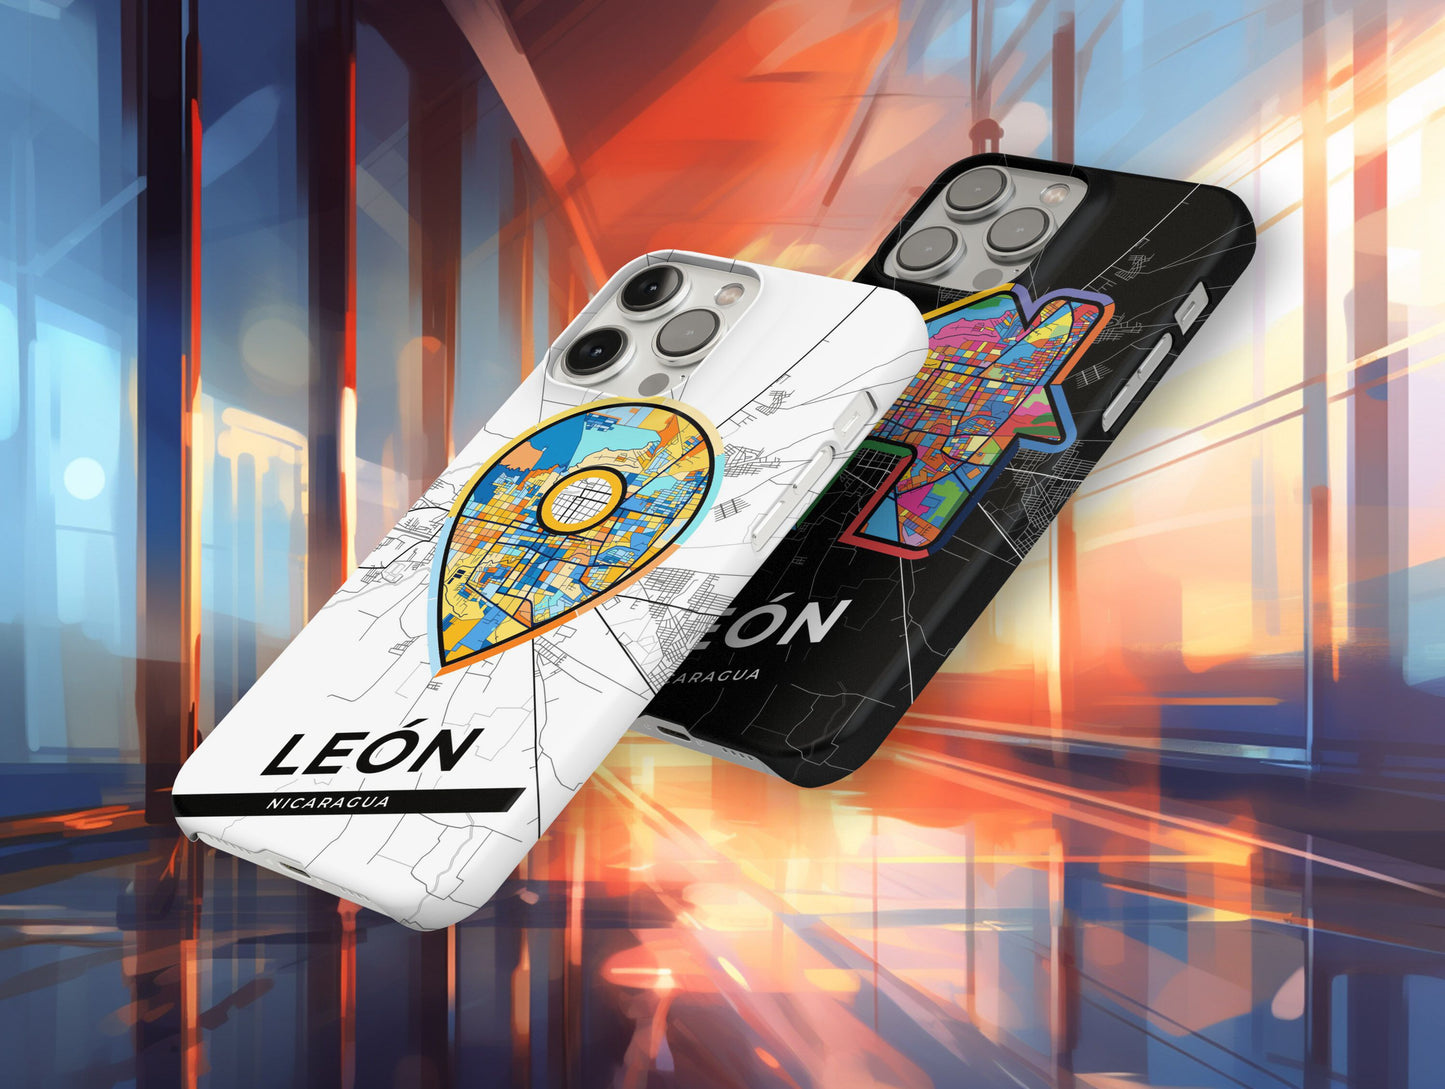 León Nicaragua slim phone case with colorful icon. Birthday, wedding or housewarming gift. Couple match cases.